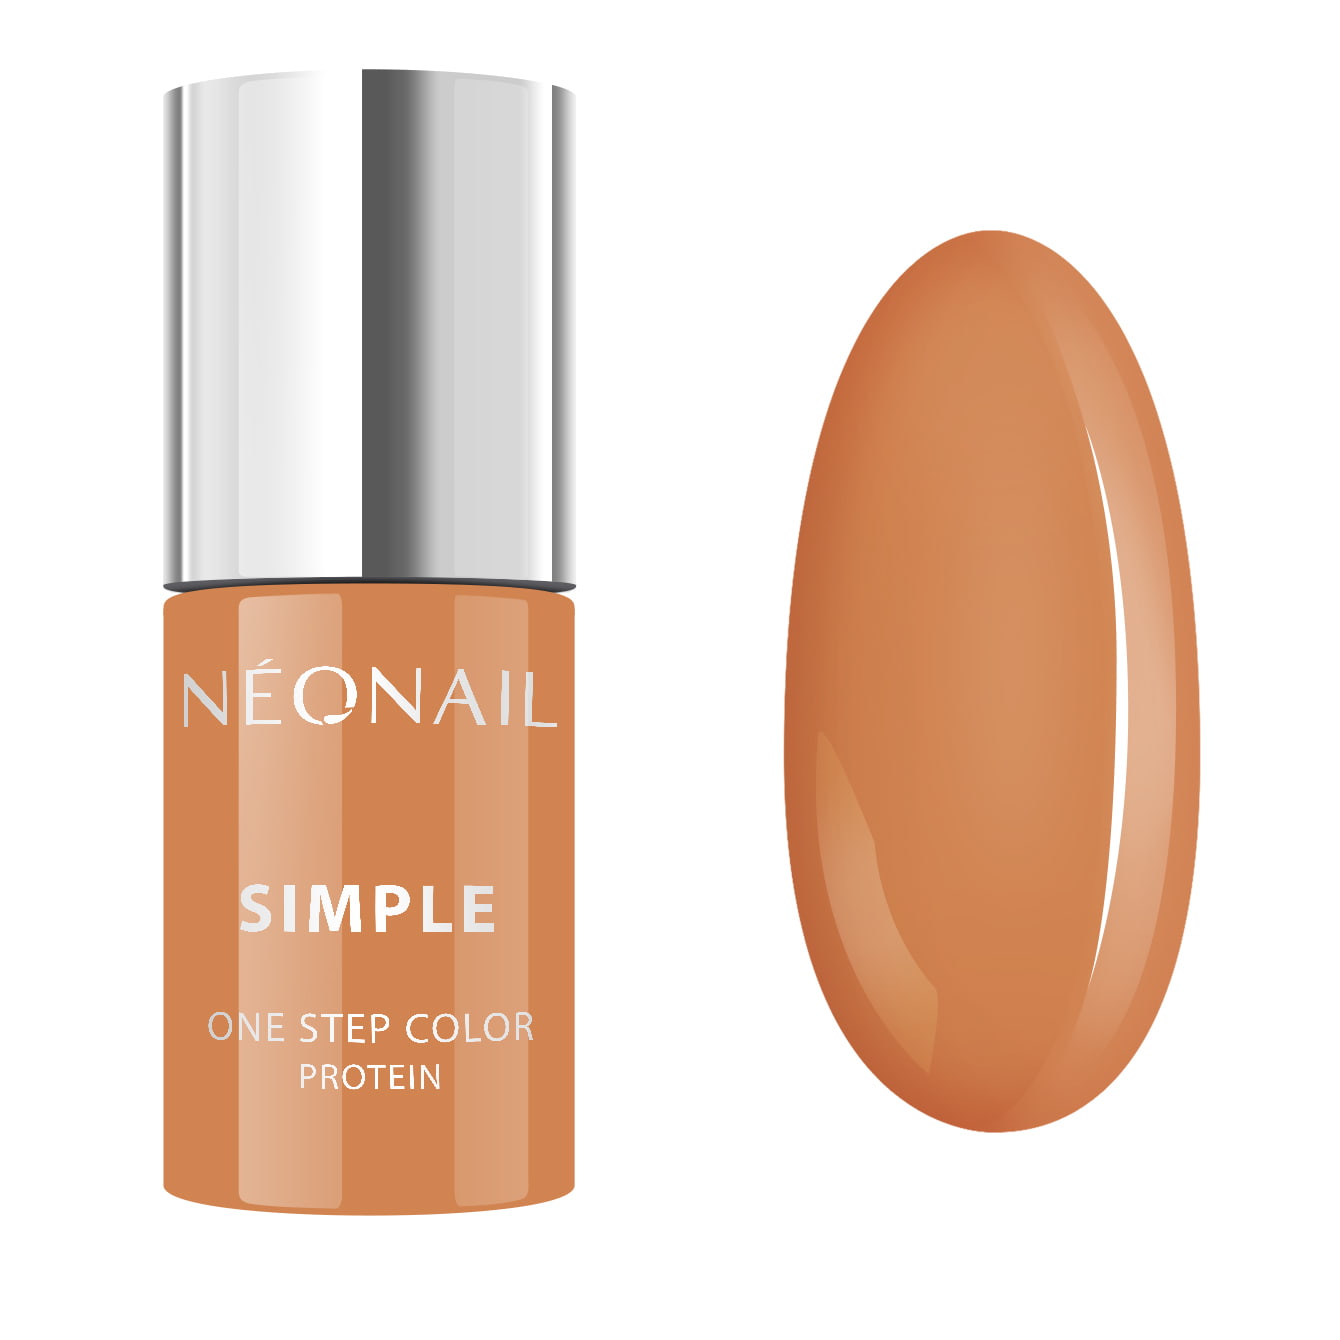 NeoNail Simple One Step Color Protein 7,2ml - Cool